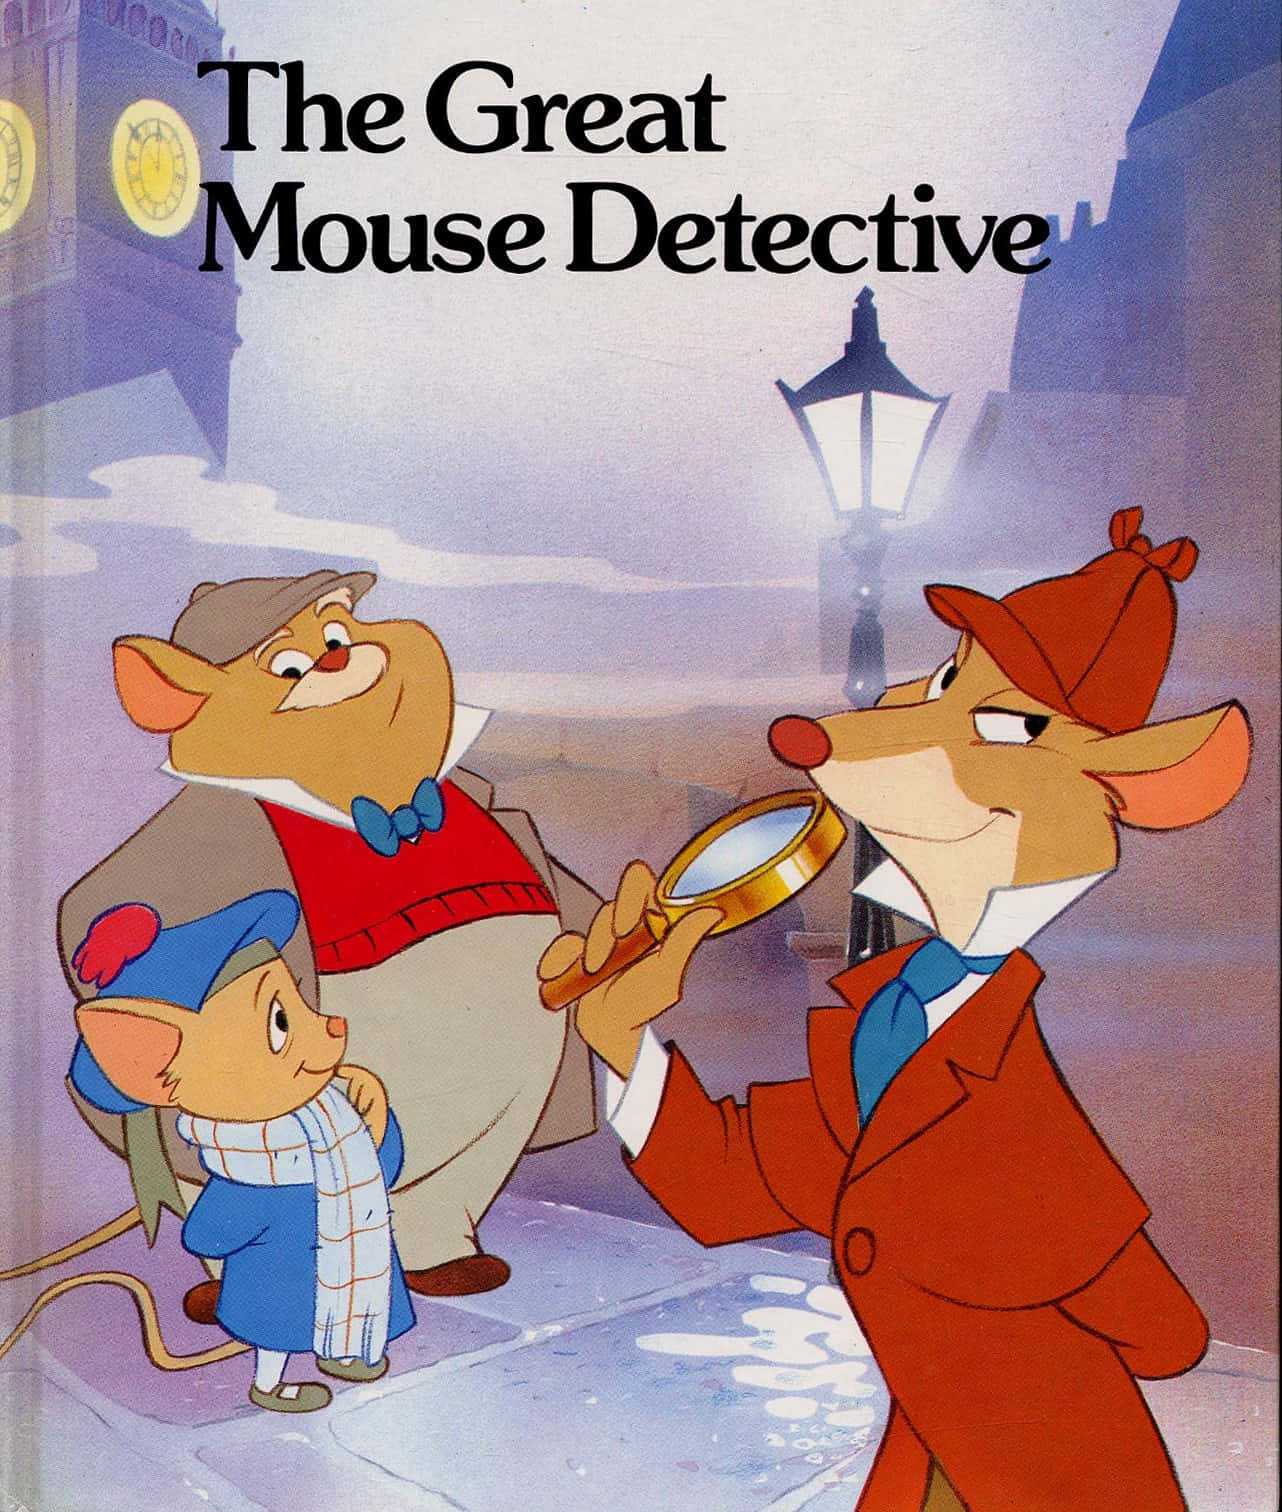 Mystery-solving mice: Basil and Dr. Dawson in The Great Mouse Detective Wallpaper